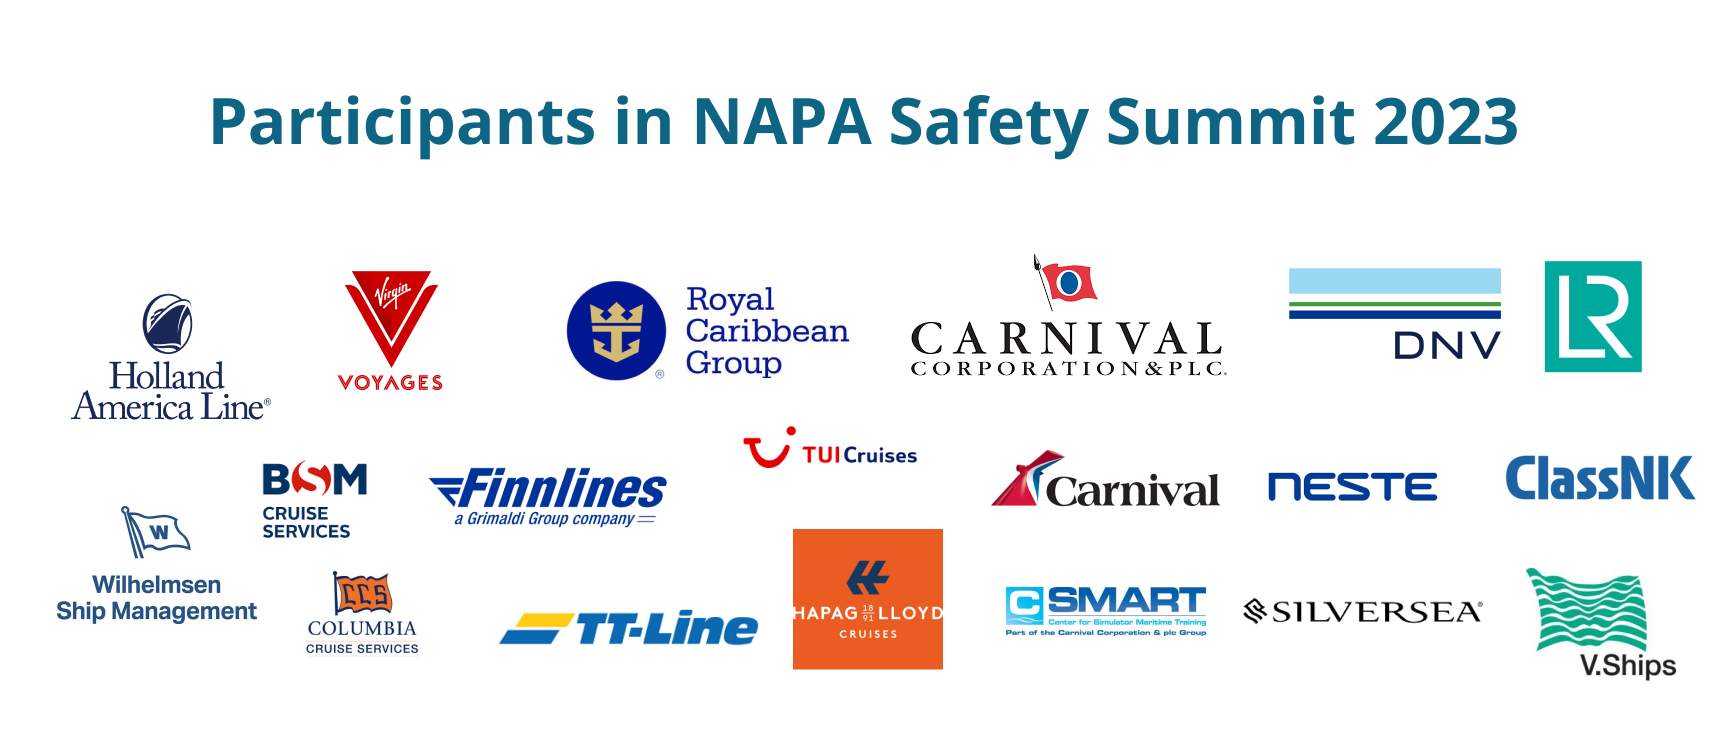 NAPA Safety Summit 2023 participants - updated